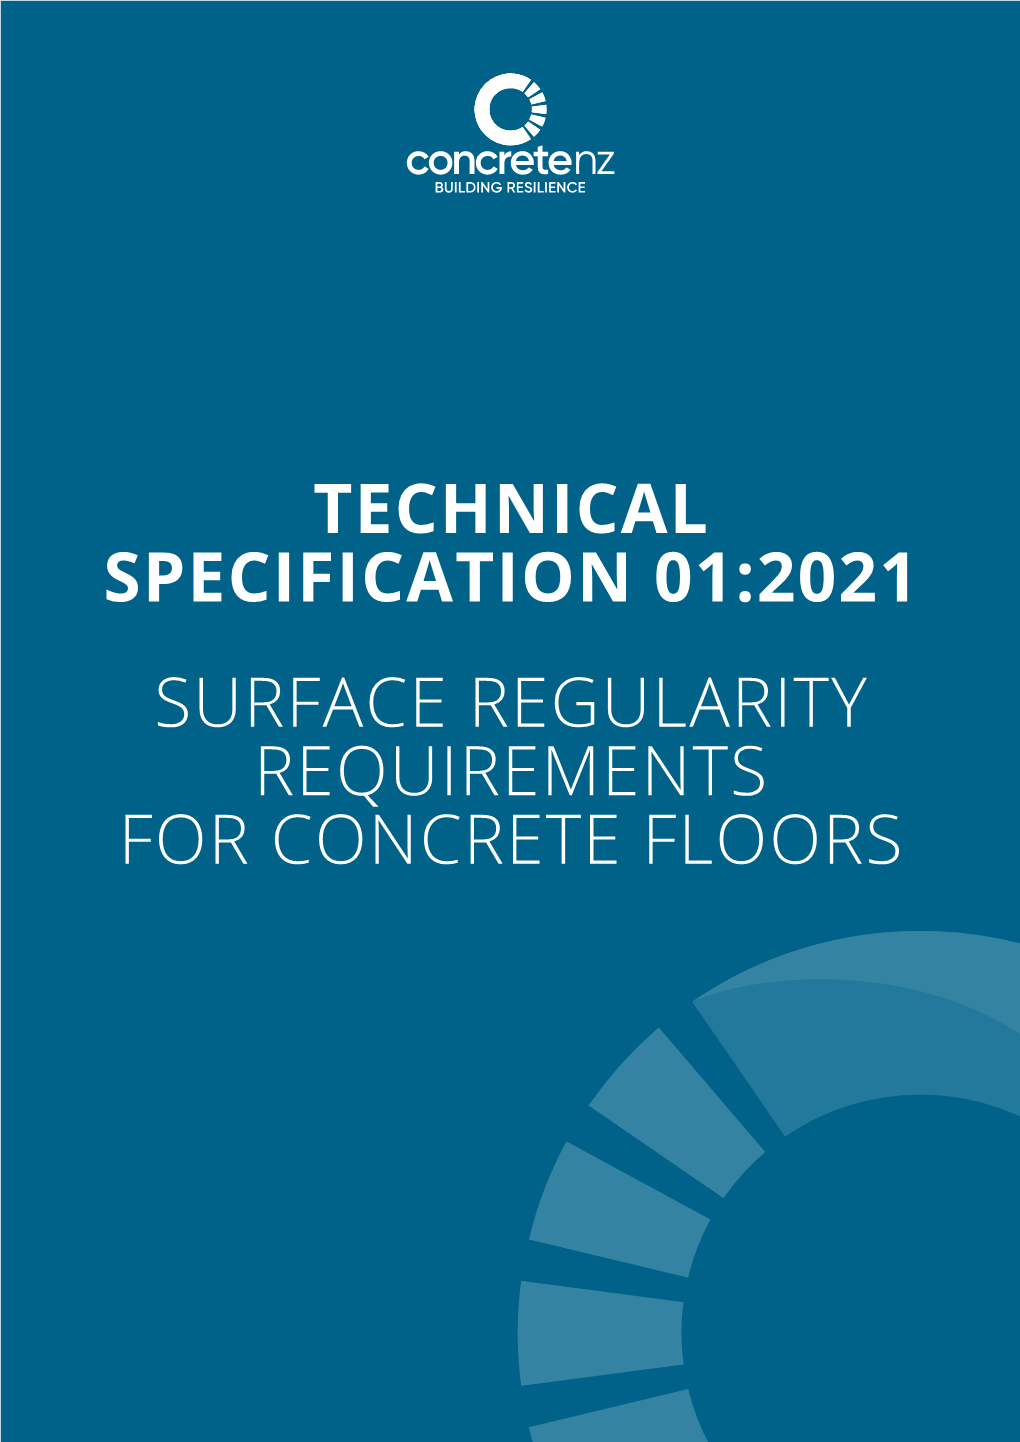 Surface Regularity Requirements for Concrete Floors